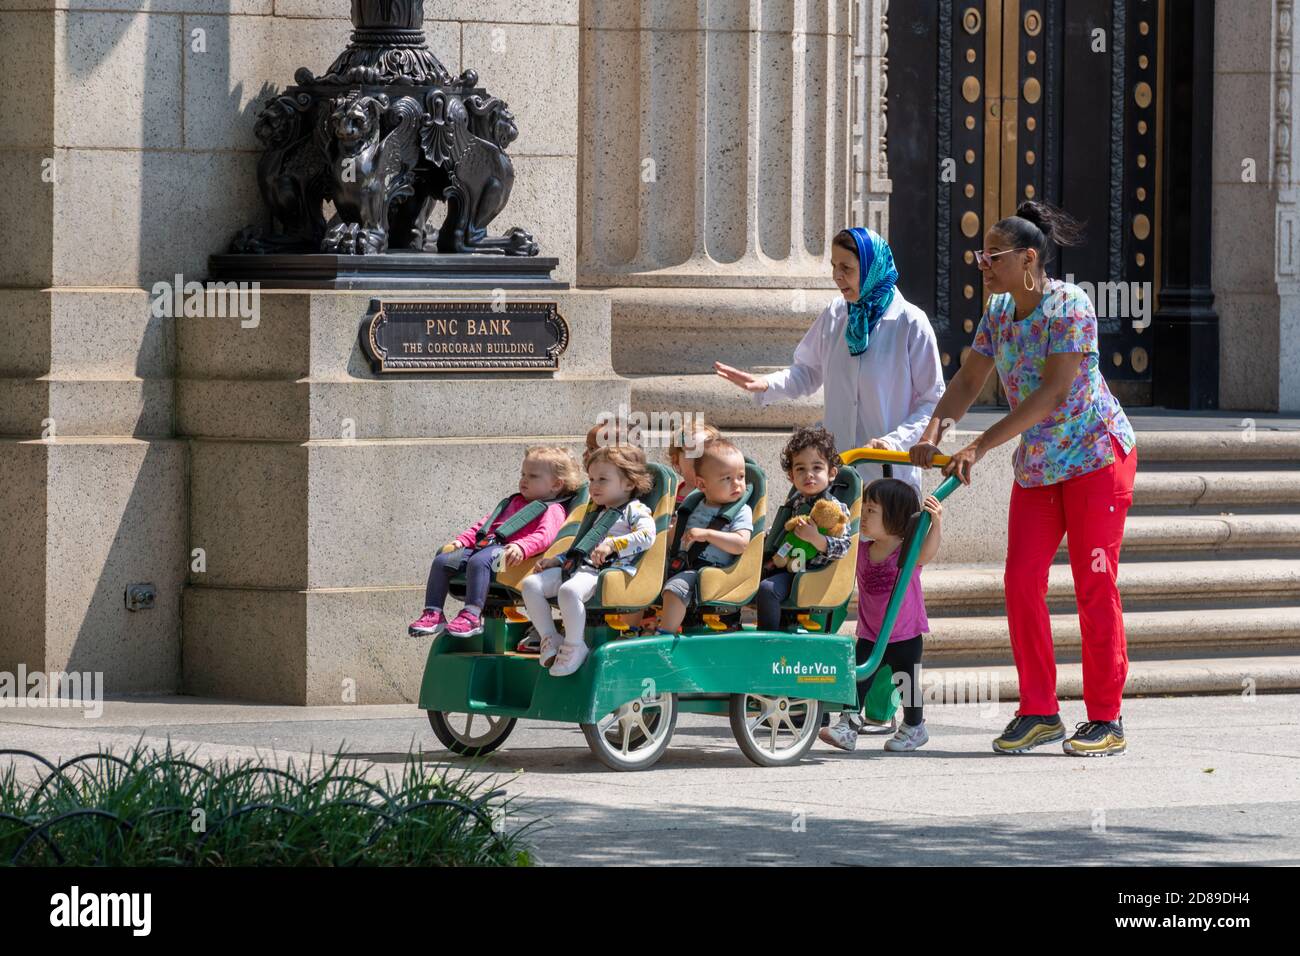 A group of young children in a KinderVan being pushed past the former PNC Bank Corcoran Building in Pennsylvania Avenue, Washington DC Stock Photo